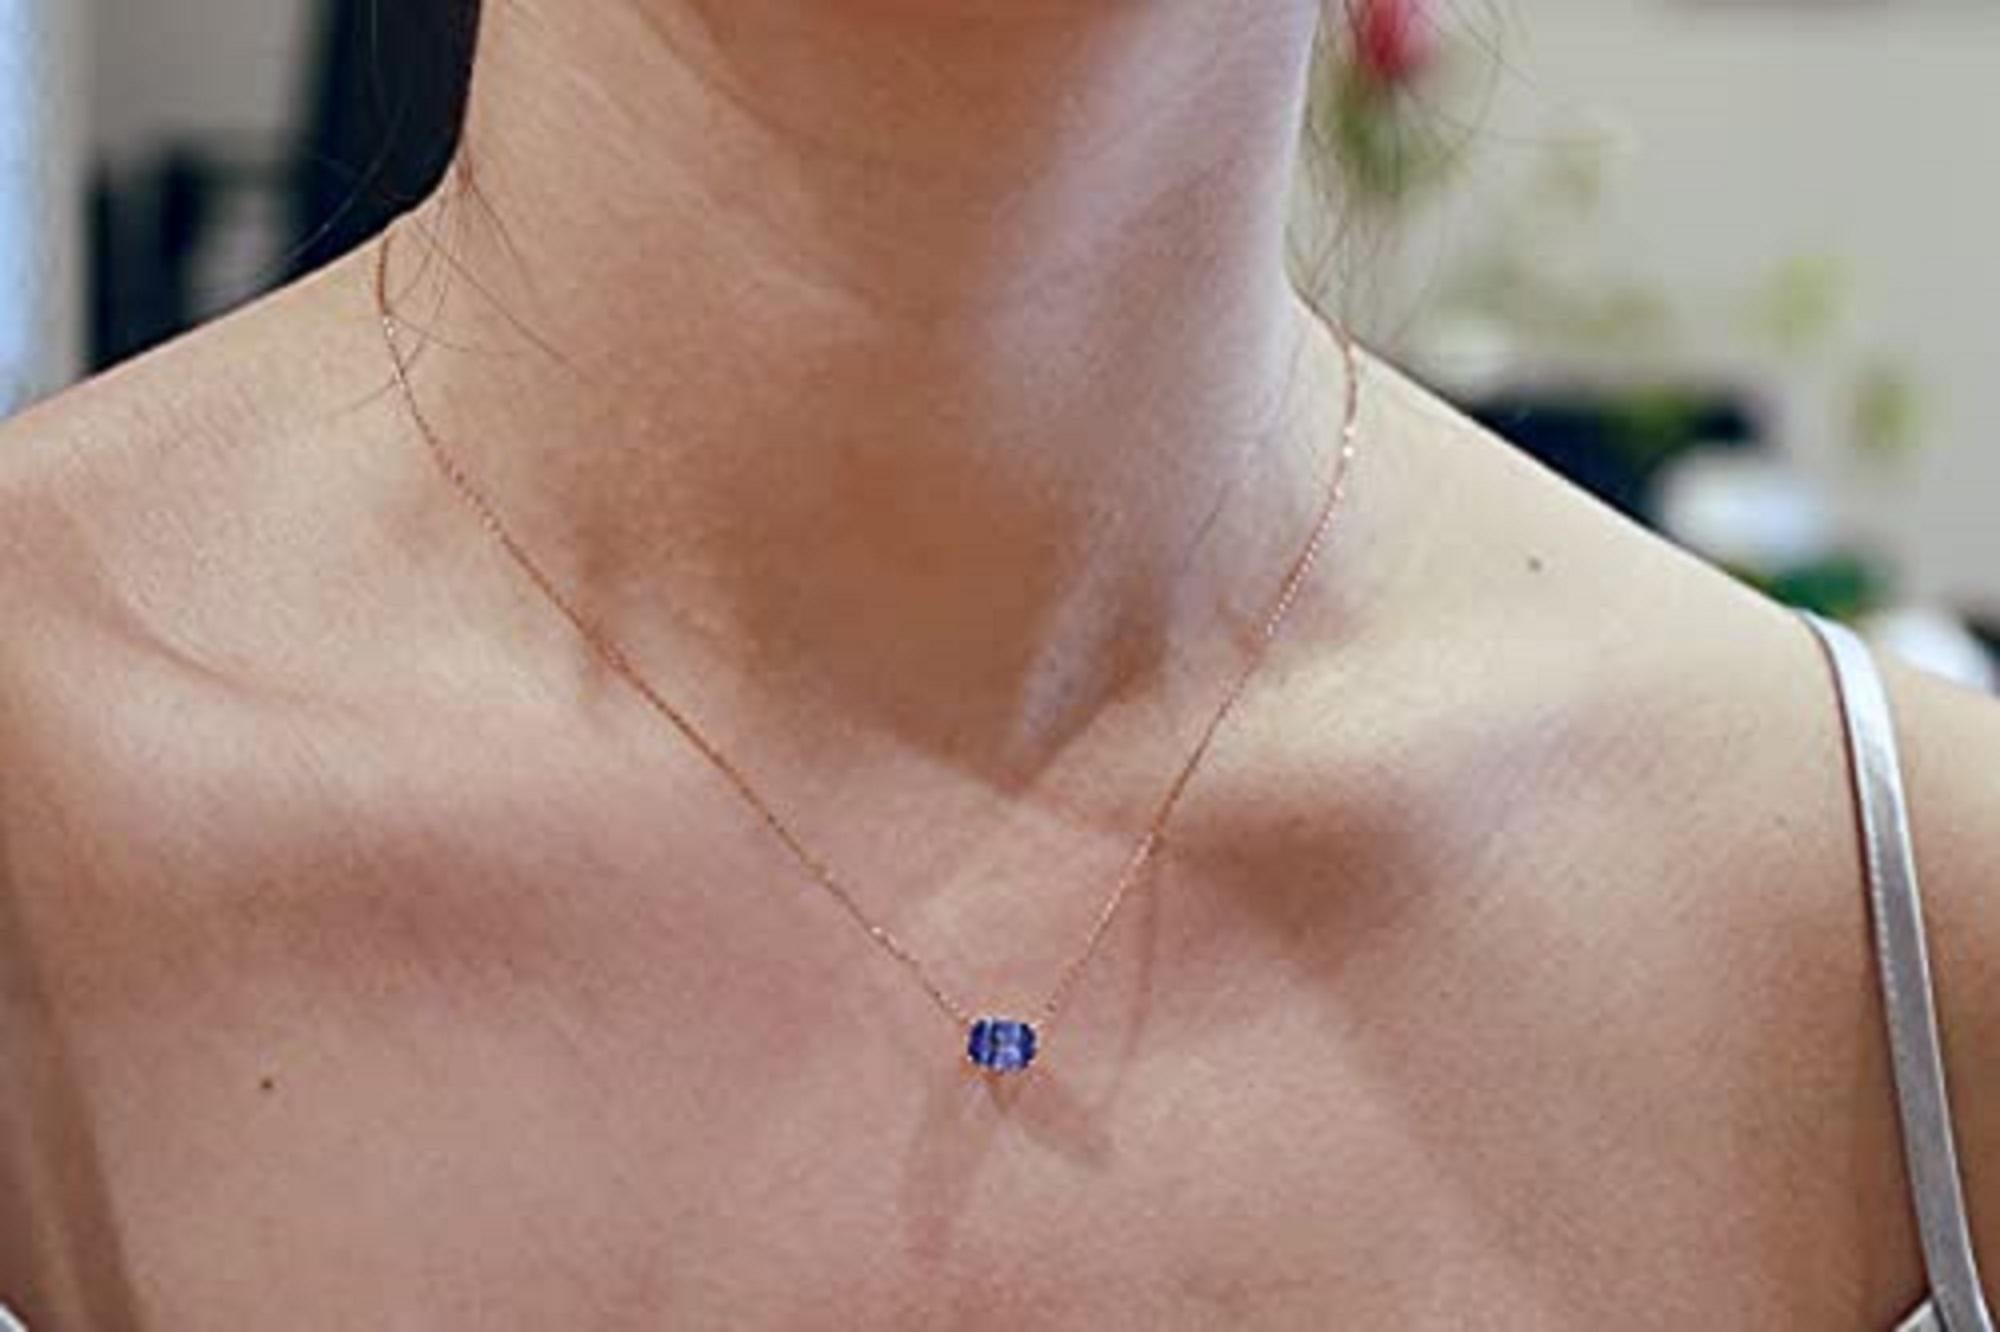 Decorate yourself in elegance with this Necklace is crafted from 10-karat Rose Gold by Gin & Grace Necklace. The jewelry boasts 6X8 Cushion-Cut prong setting Genuine Tanzanite (1pcs) 1.58 Carat. This Necklace is weight 1.84 grams. The gorgeous